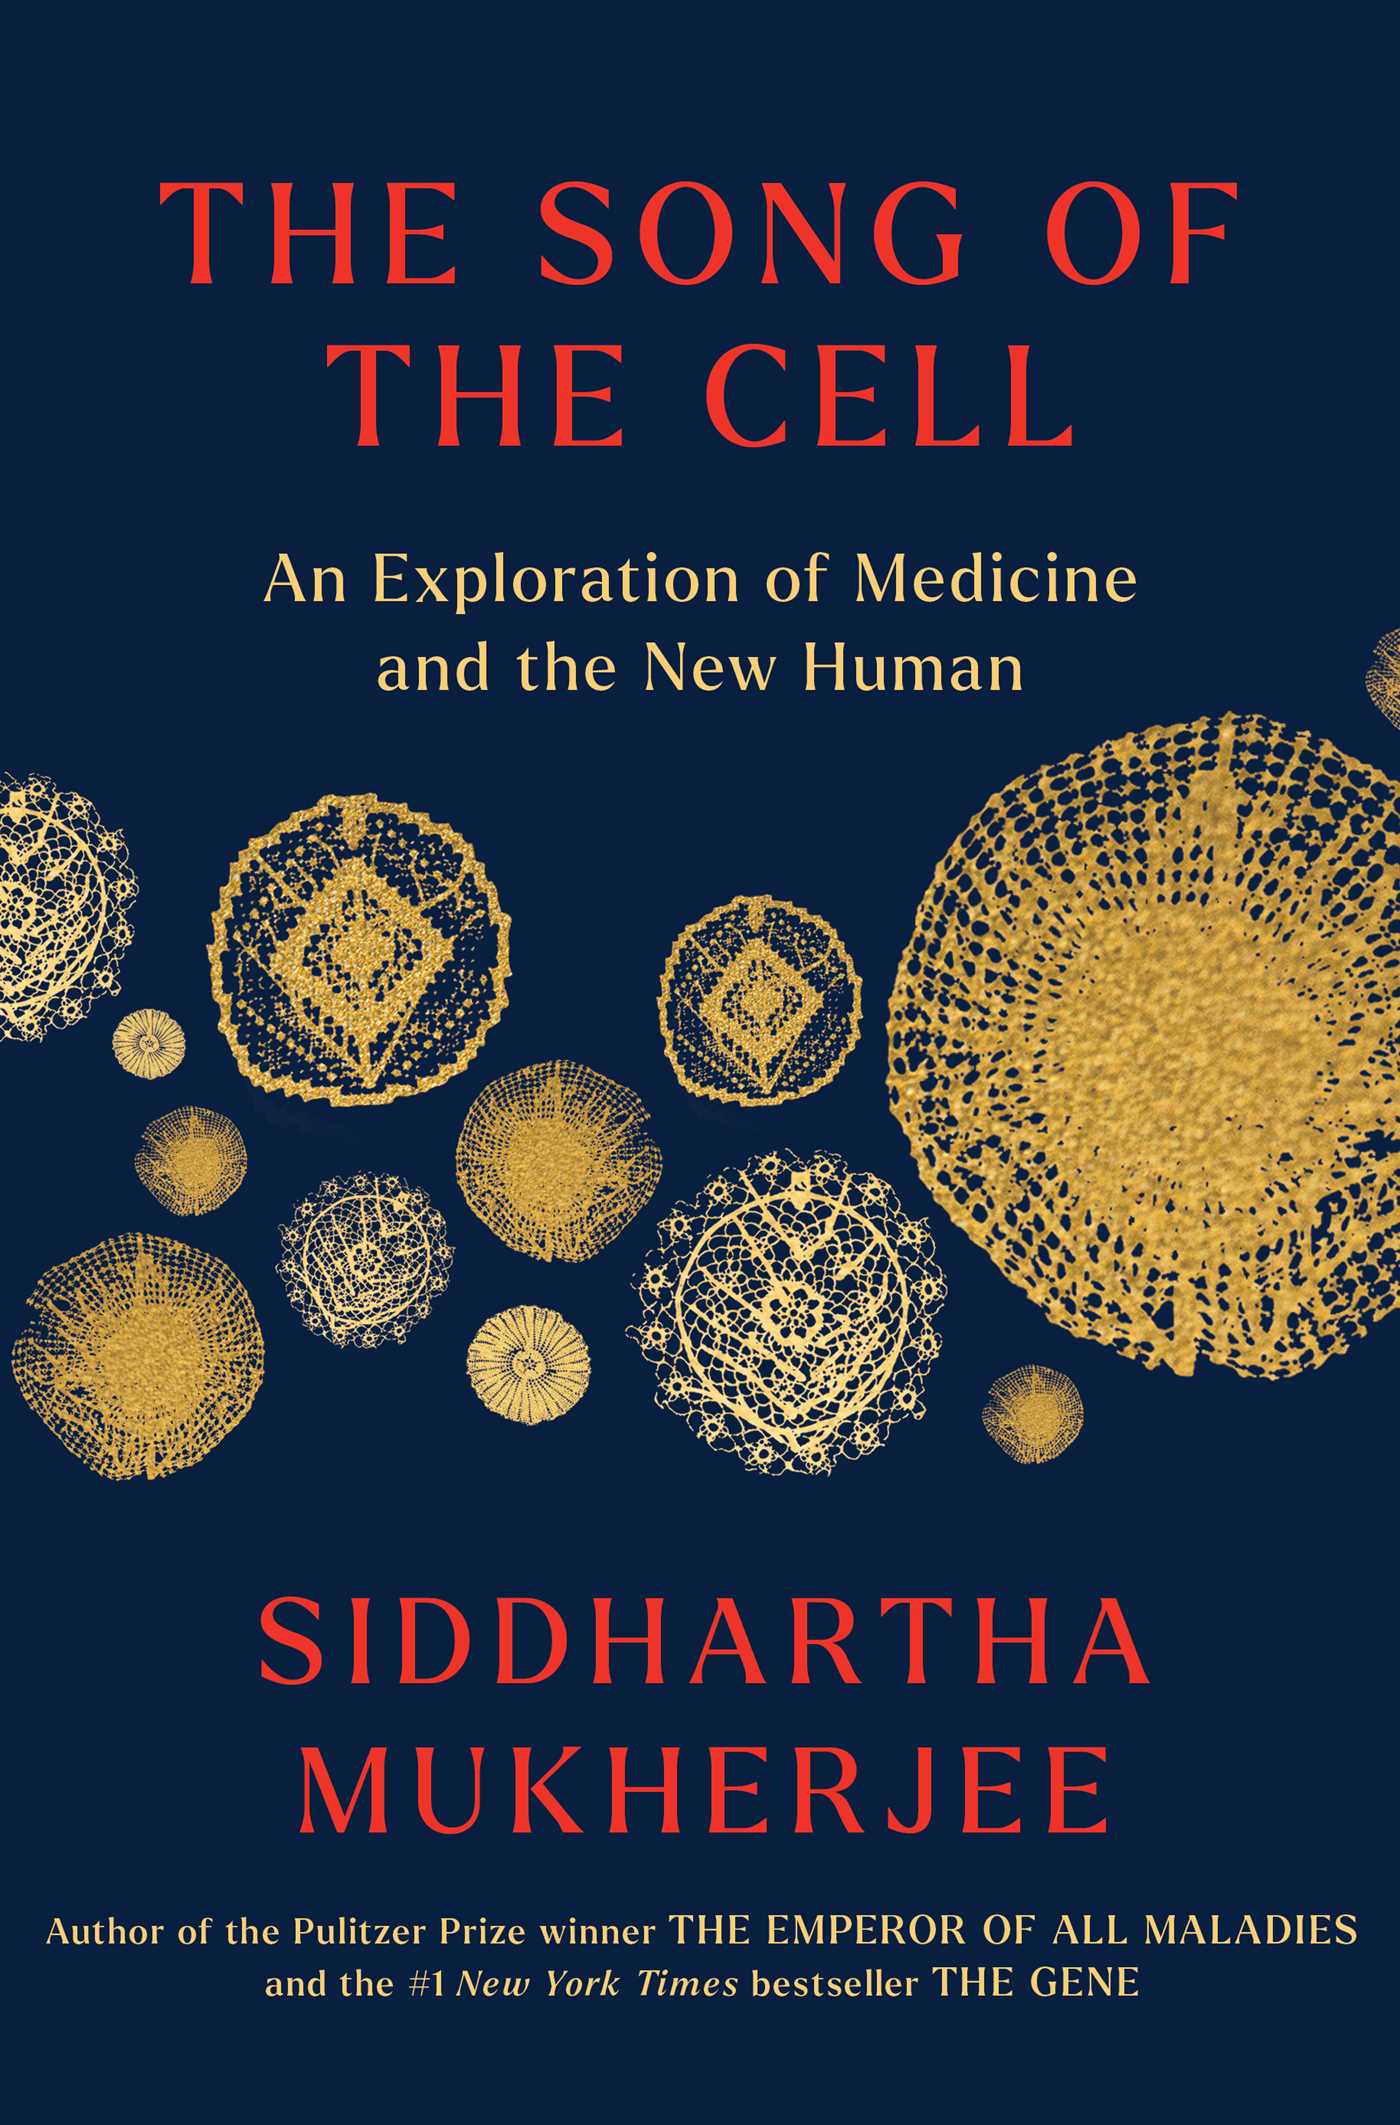 The Song of the Cell by Siddhartha Mukherjee Free Download